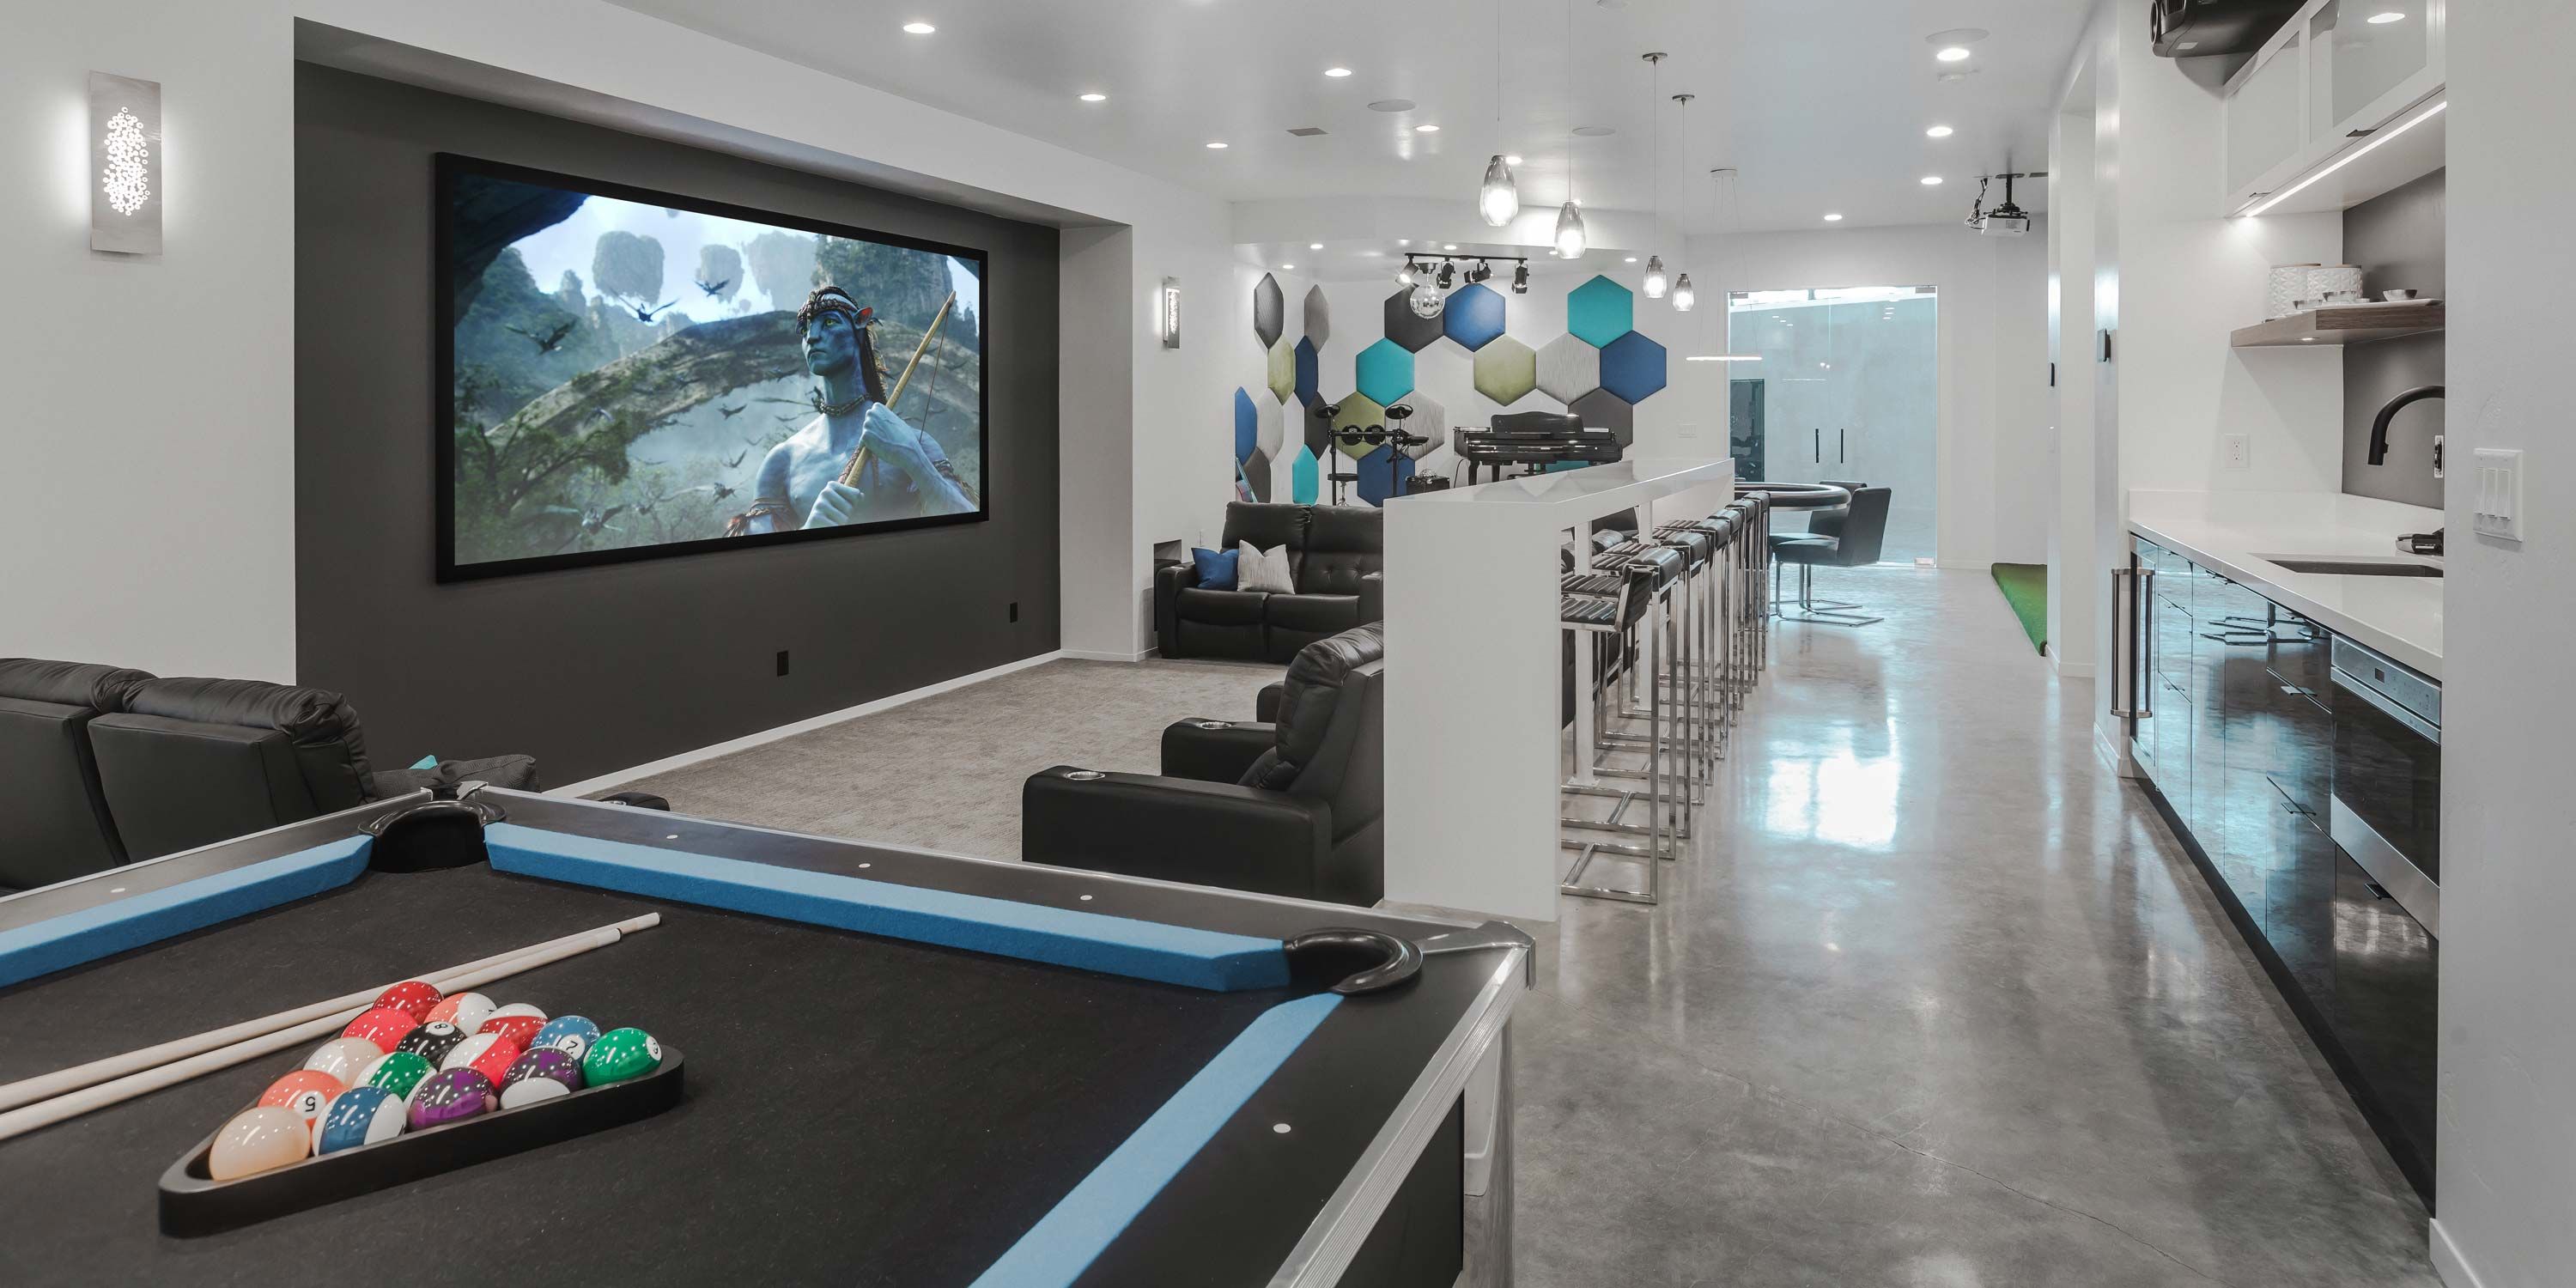 Lighting Control Systems Park City, UT, Indoor living, Home Automation, Smart Home Technology, Utah, Argenta, Bar Game Room